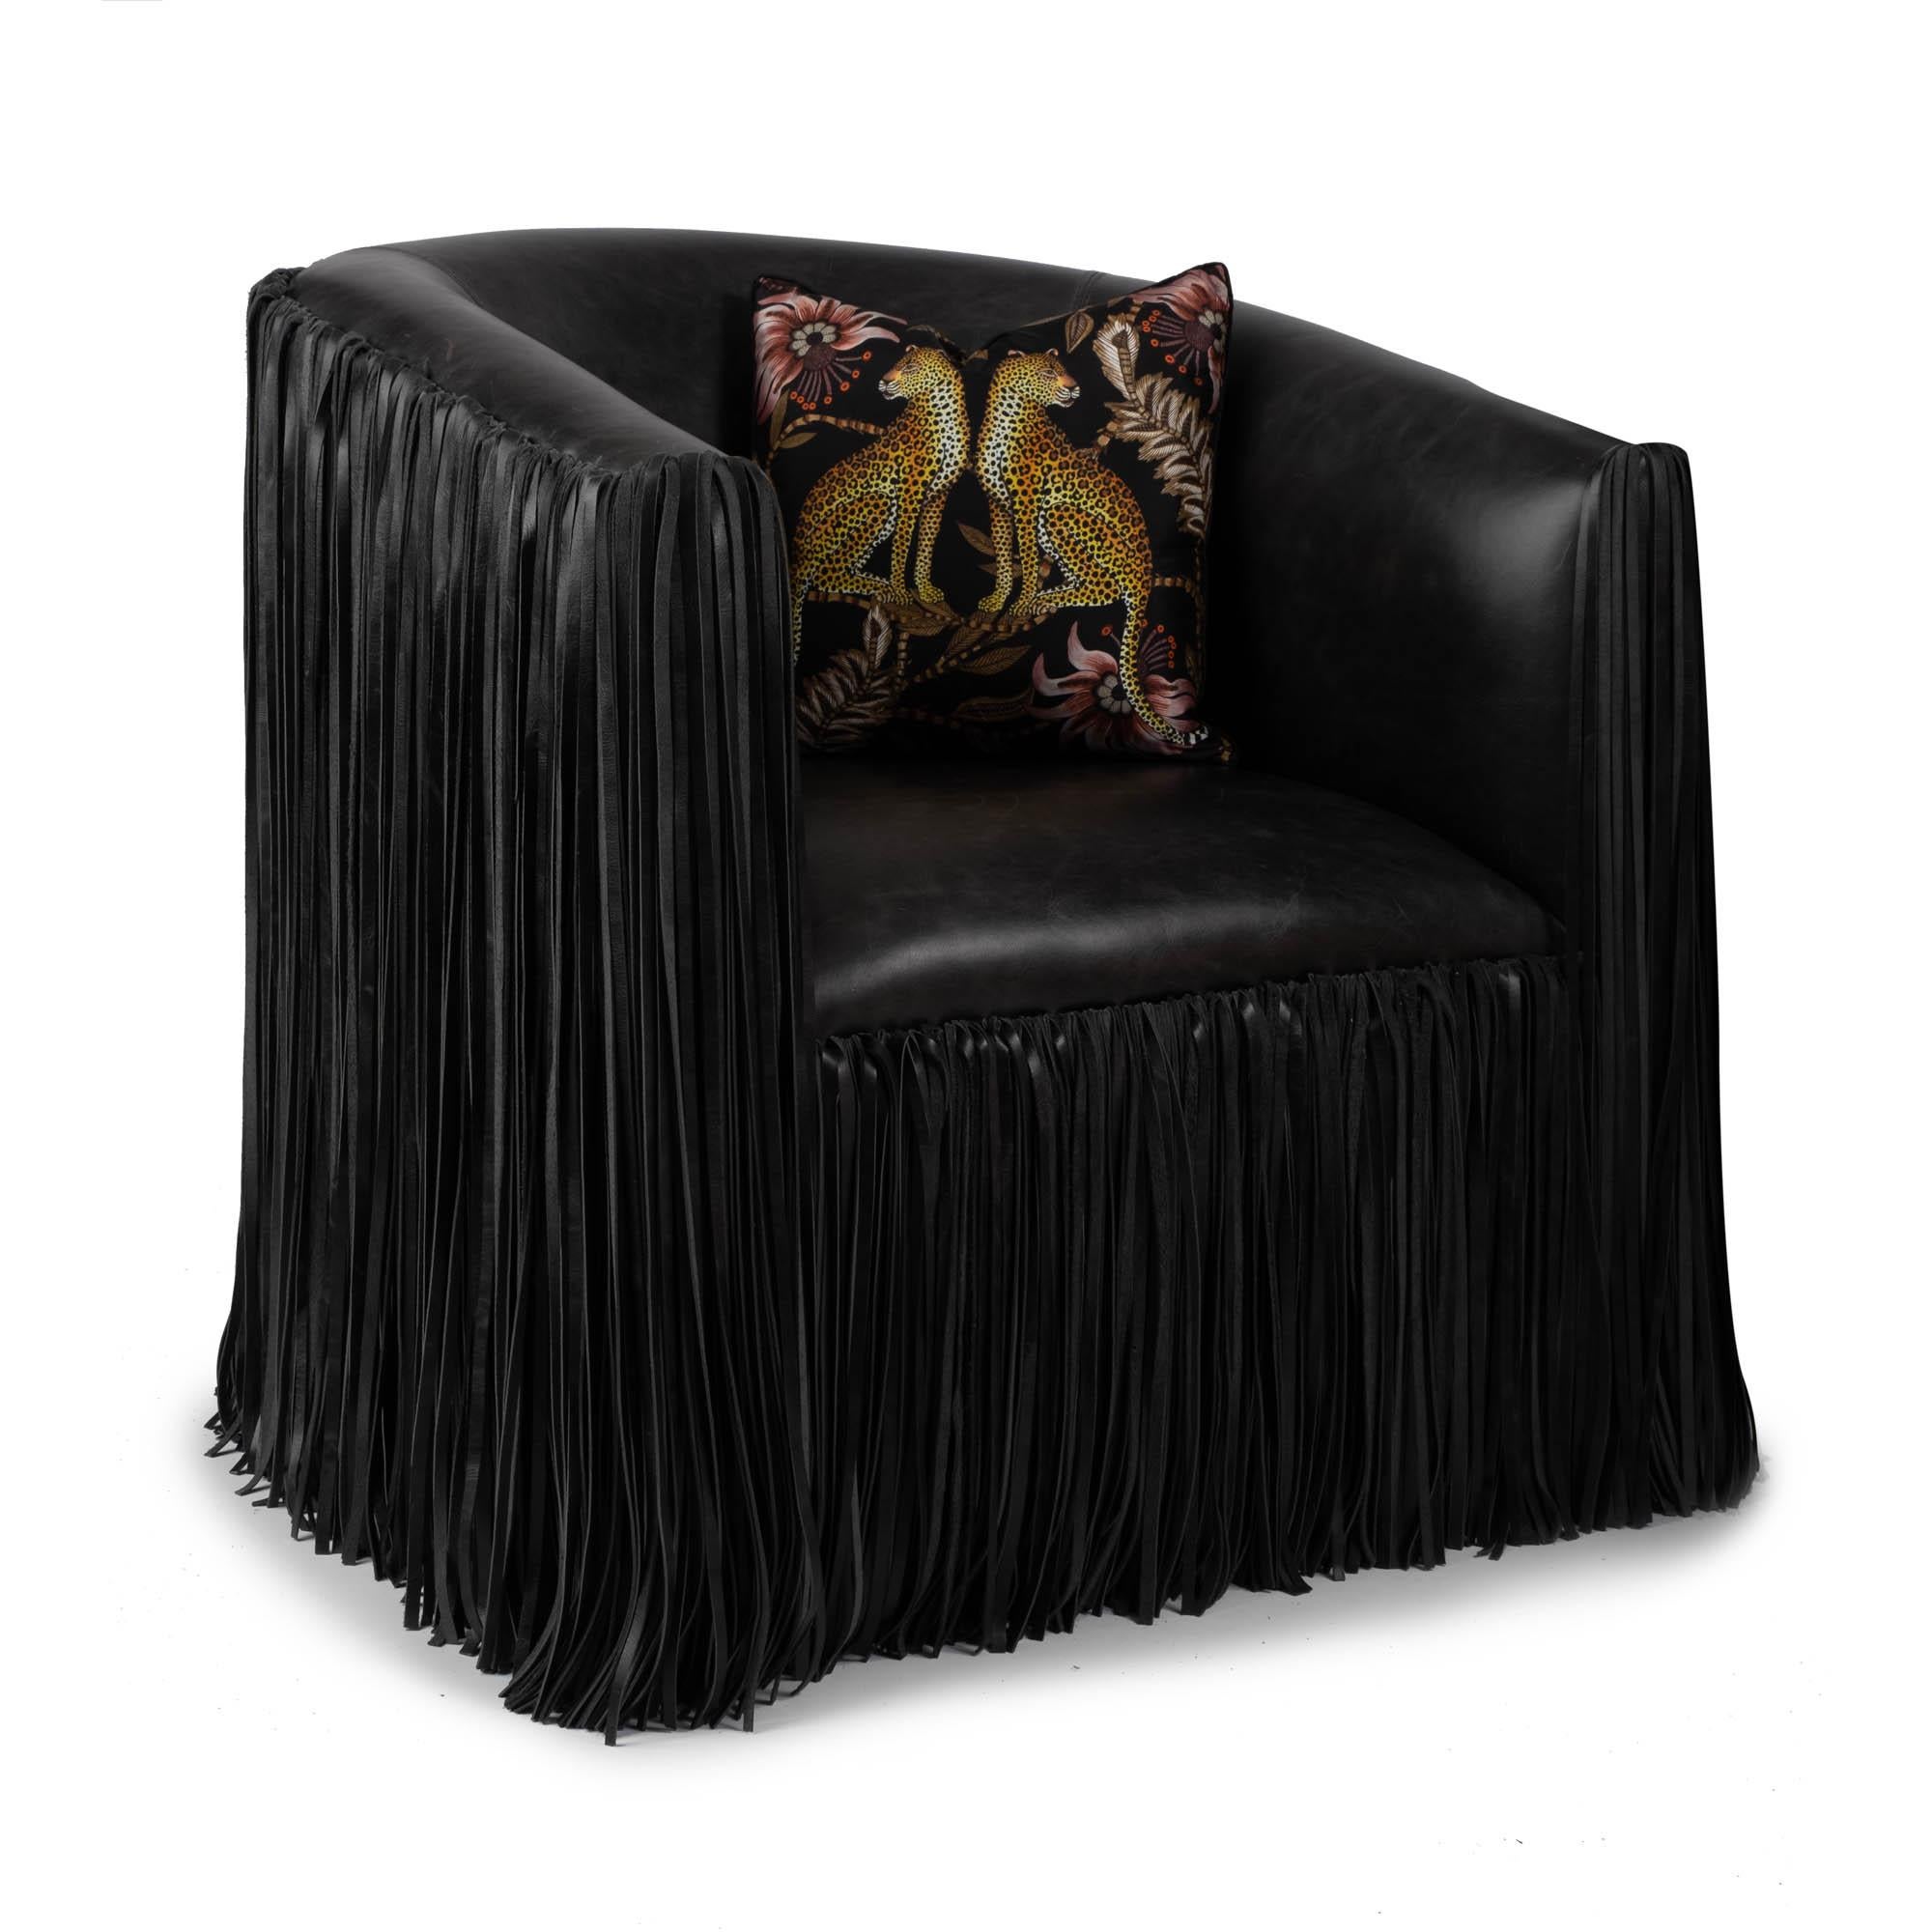 Chair - Shaggy Leather Swivel in Black For Sale 8